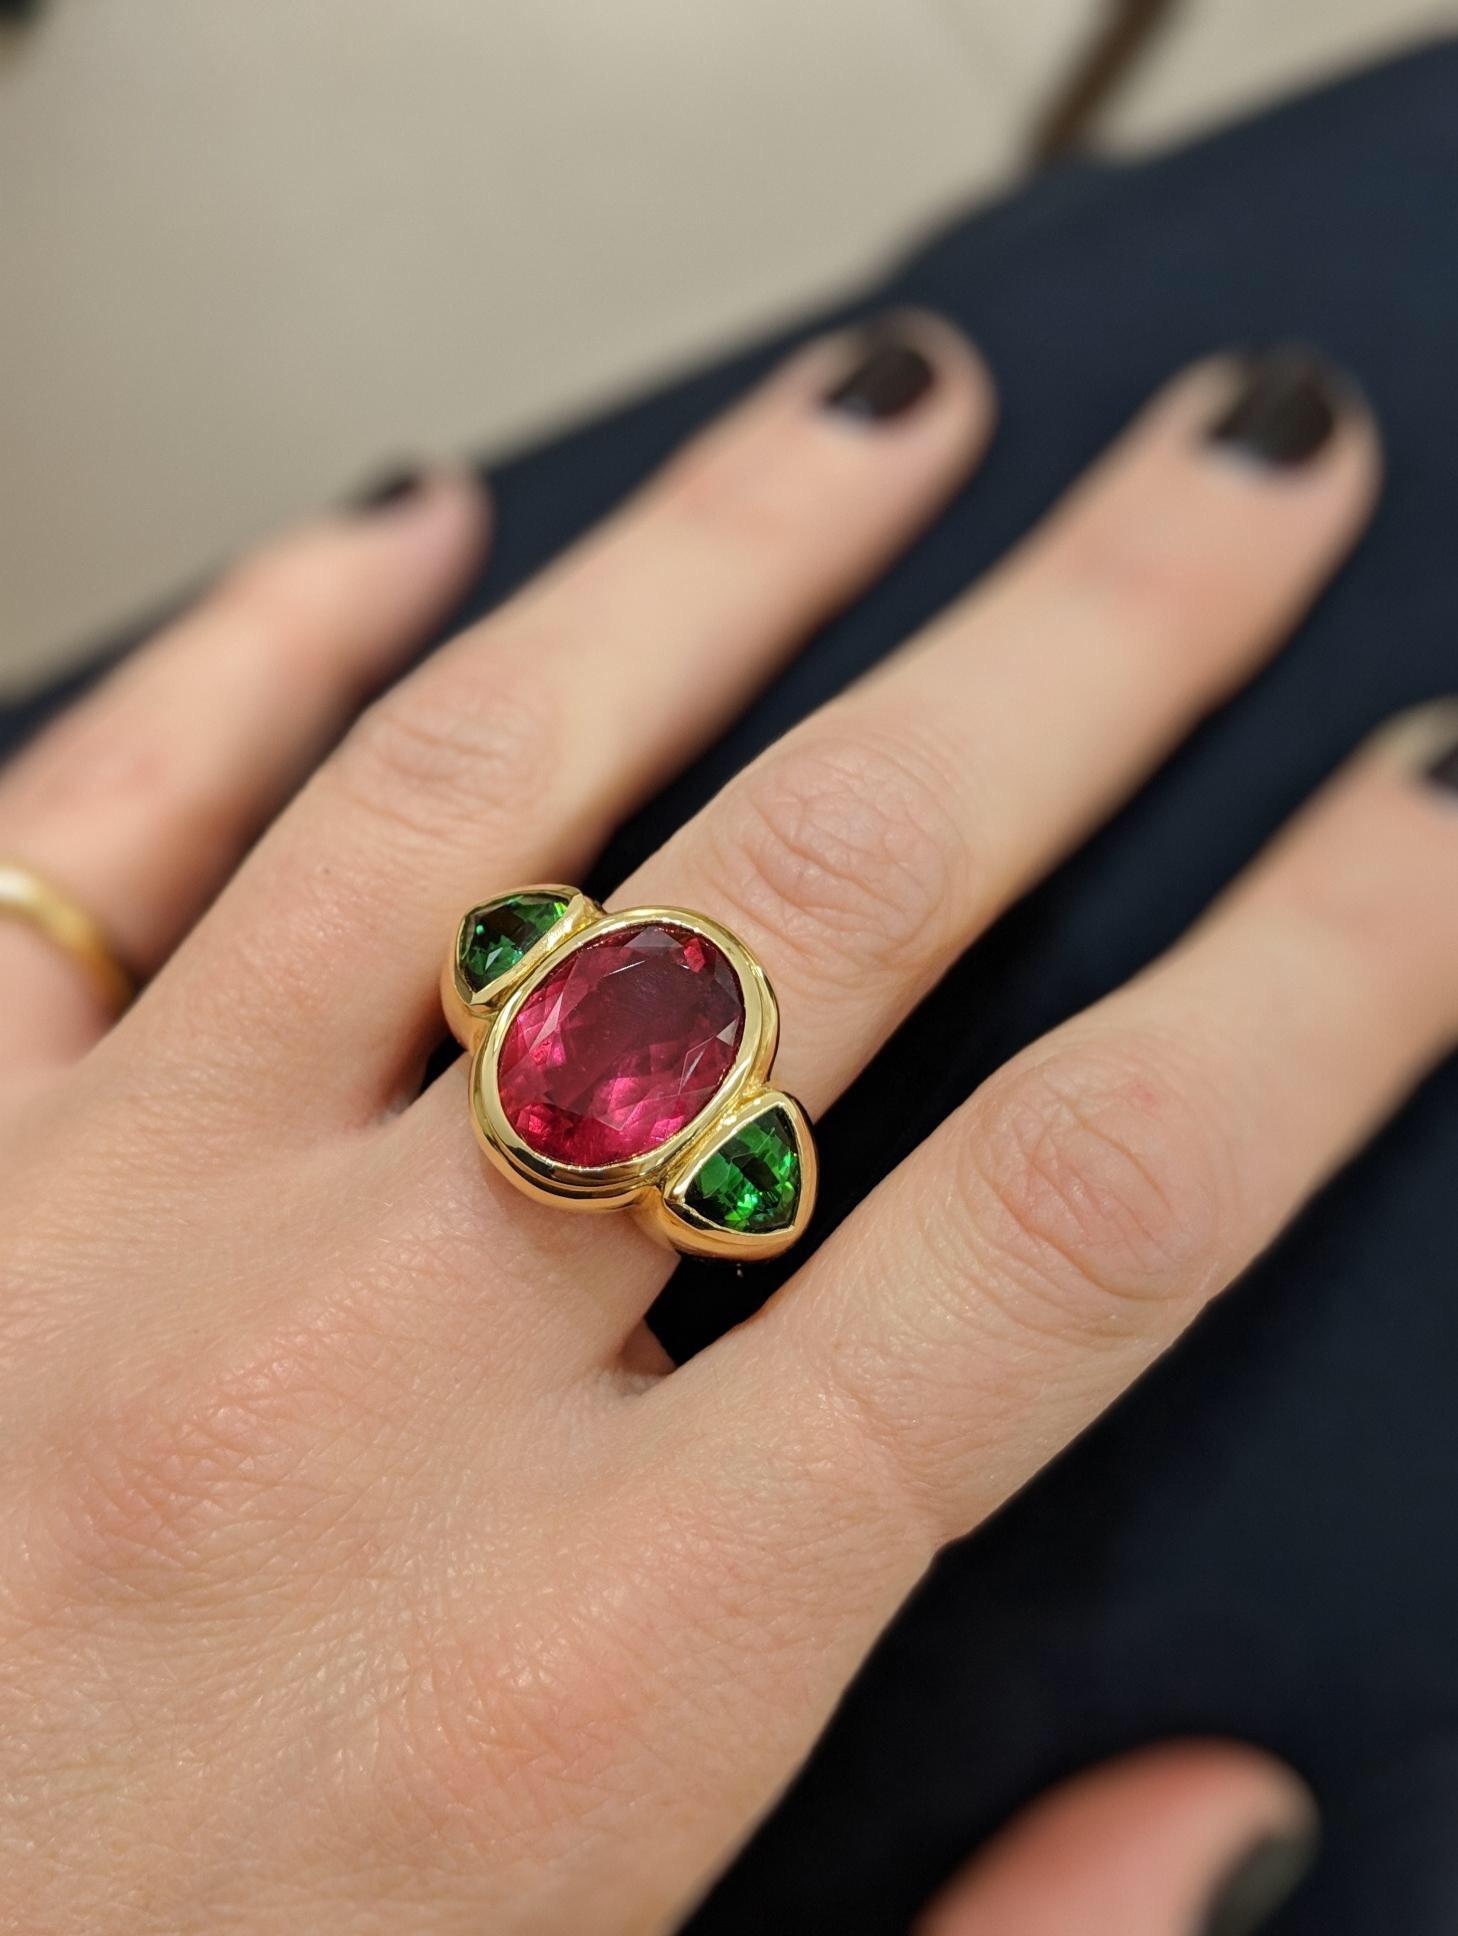 One of a kind, handmade ring exclusively for Cellini Jewelers In NYC. This 18kt yellow gold high polished ring features a magnificent Oval Rubellite weighing  7.27 carats in the center, flanked by a pair of Green Tourmaline Trillions weighing 2.38